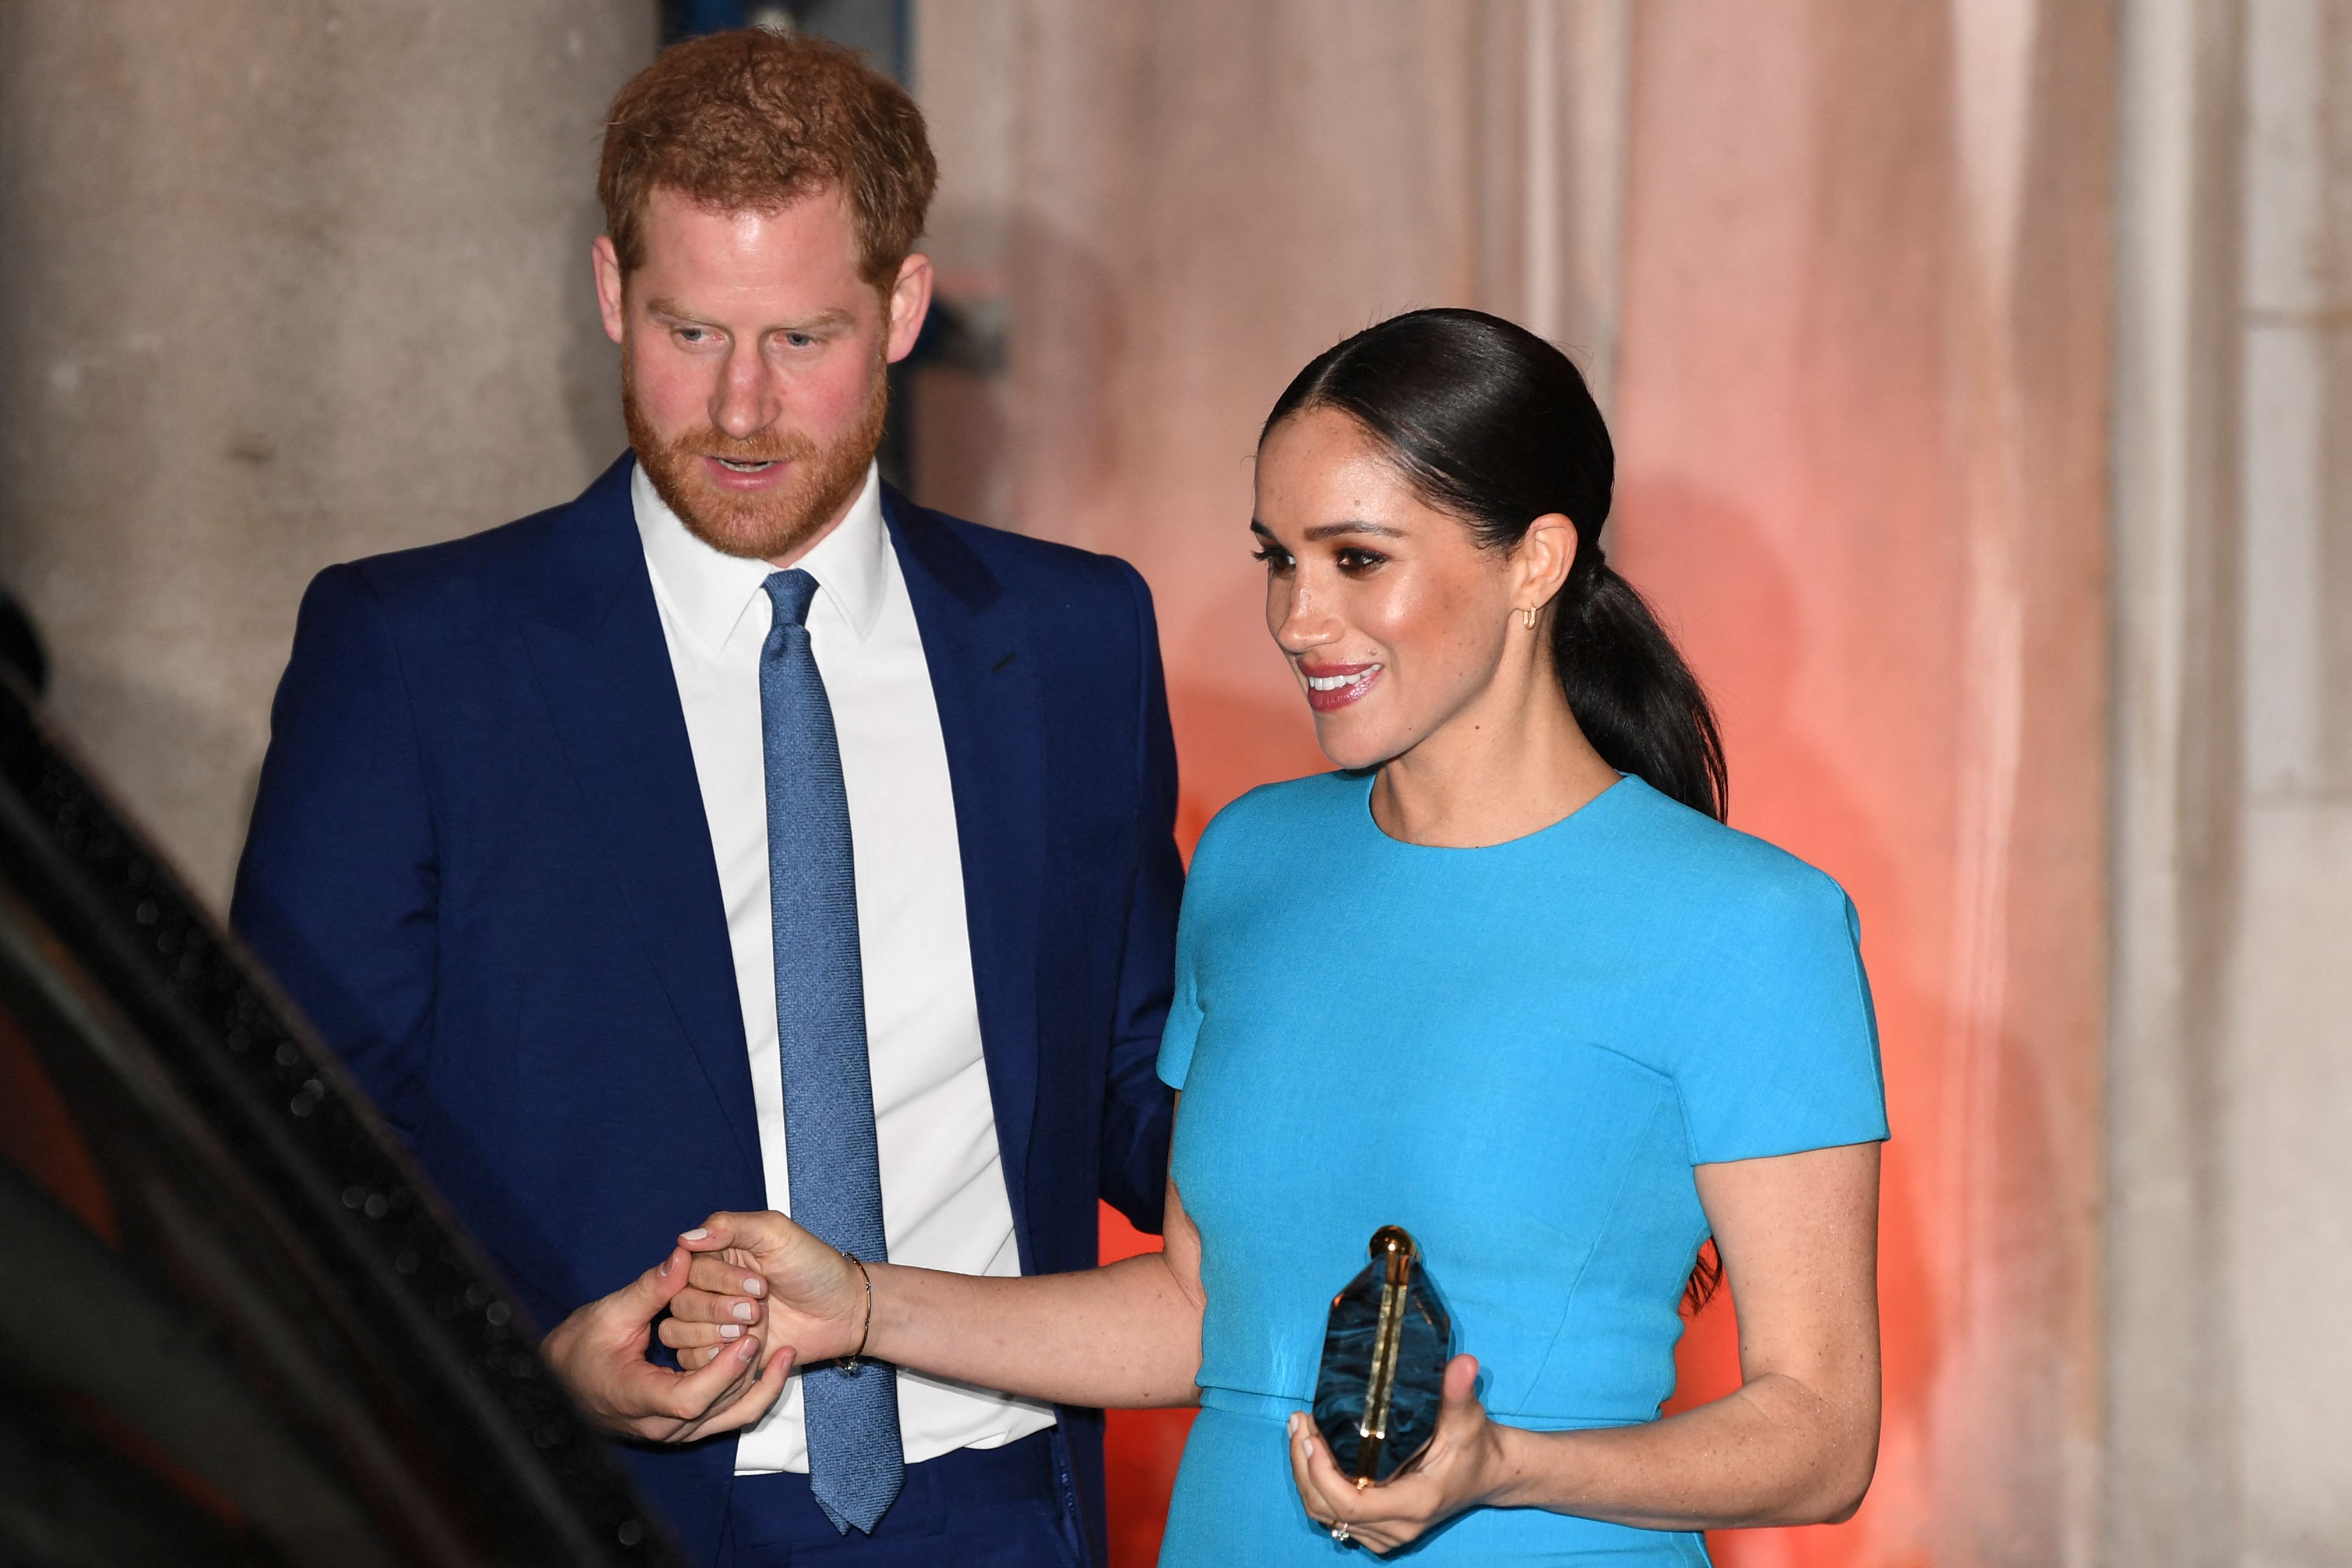 Britain's Prince Harry, Duke of Sussex, and Meghan, Duchess of Sussex leave after attending the Endeavour Fund Awards at Mansion House in London on March 5, 2020. | Source: Getty Images